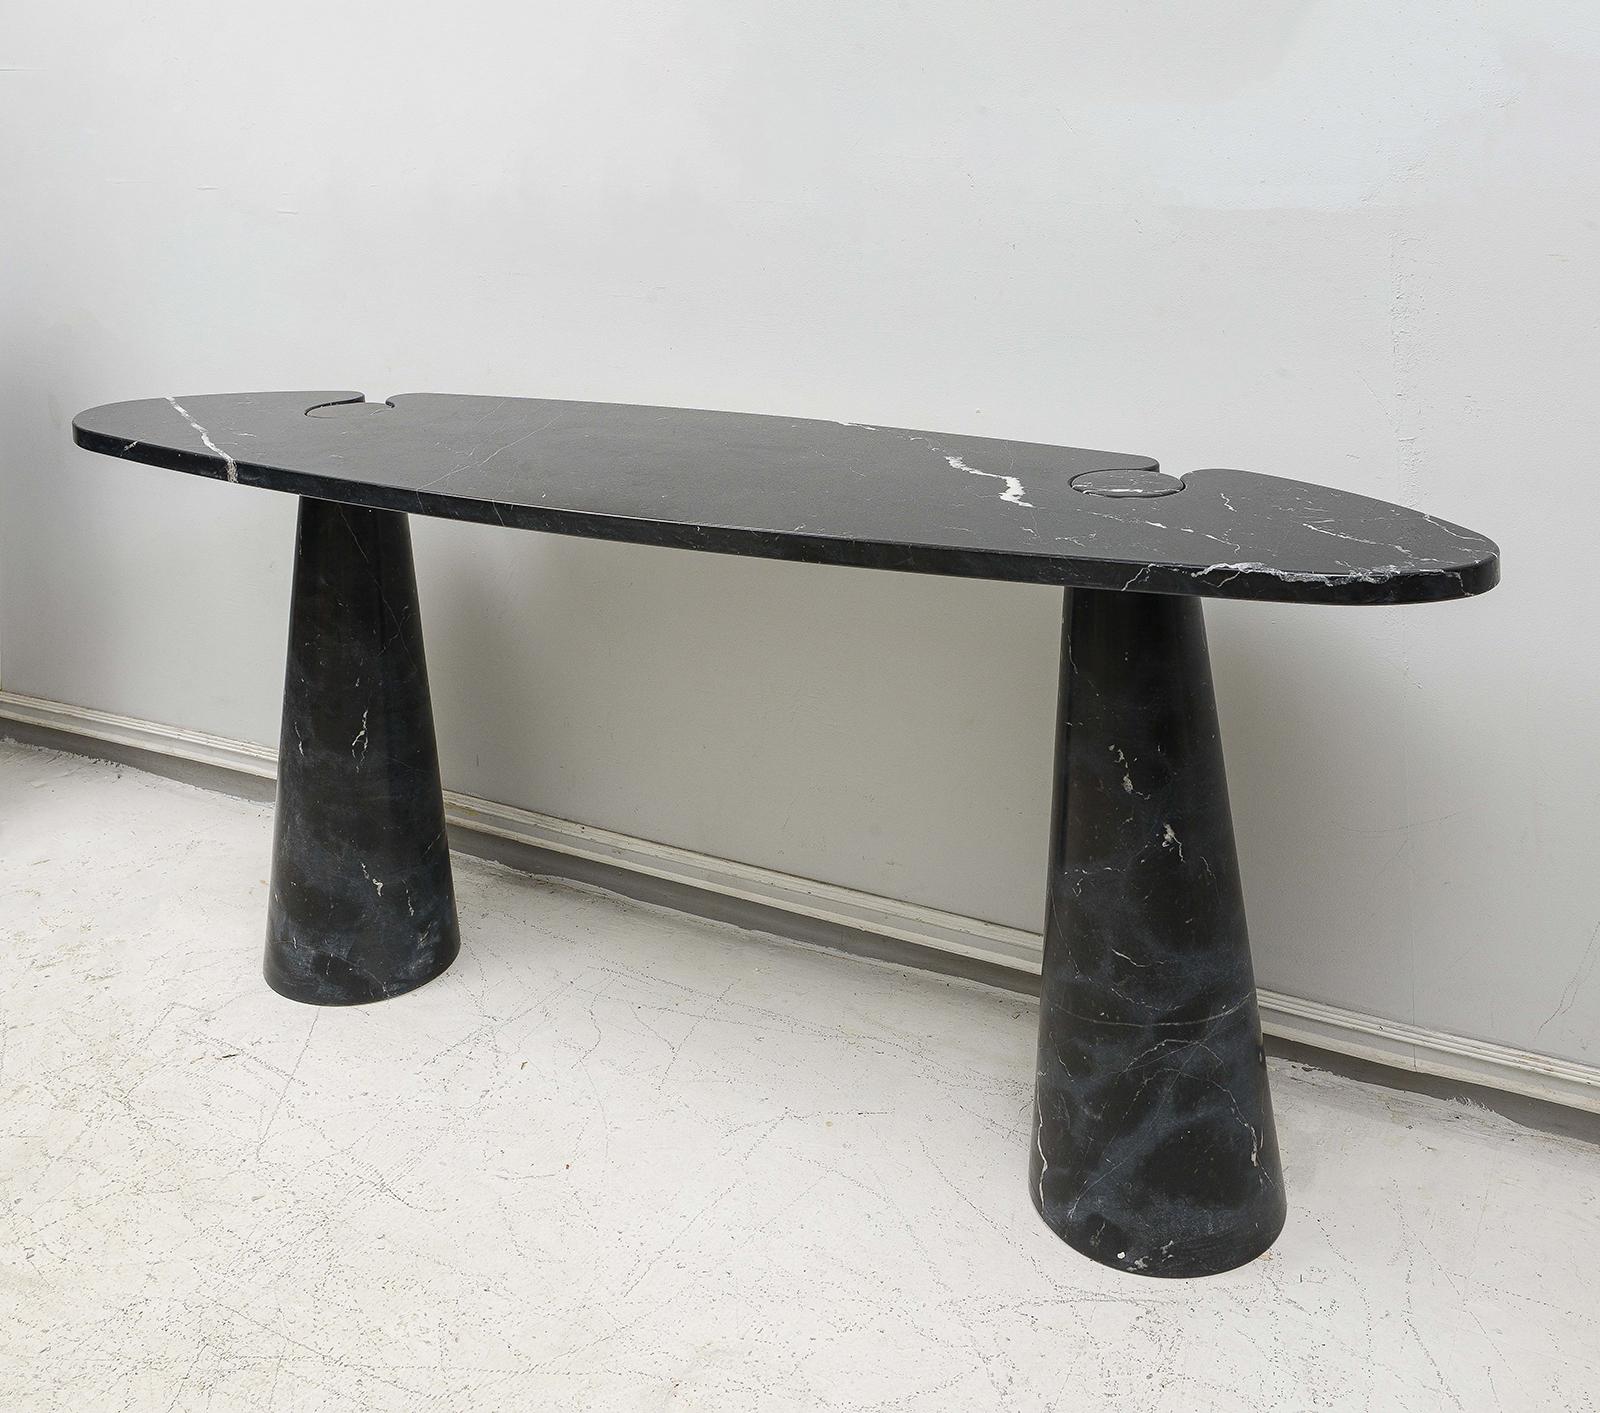 Organic Modern Angelo Mangiarotti Console Table from the 